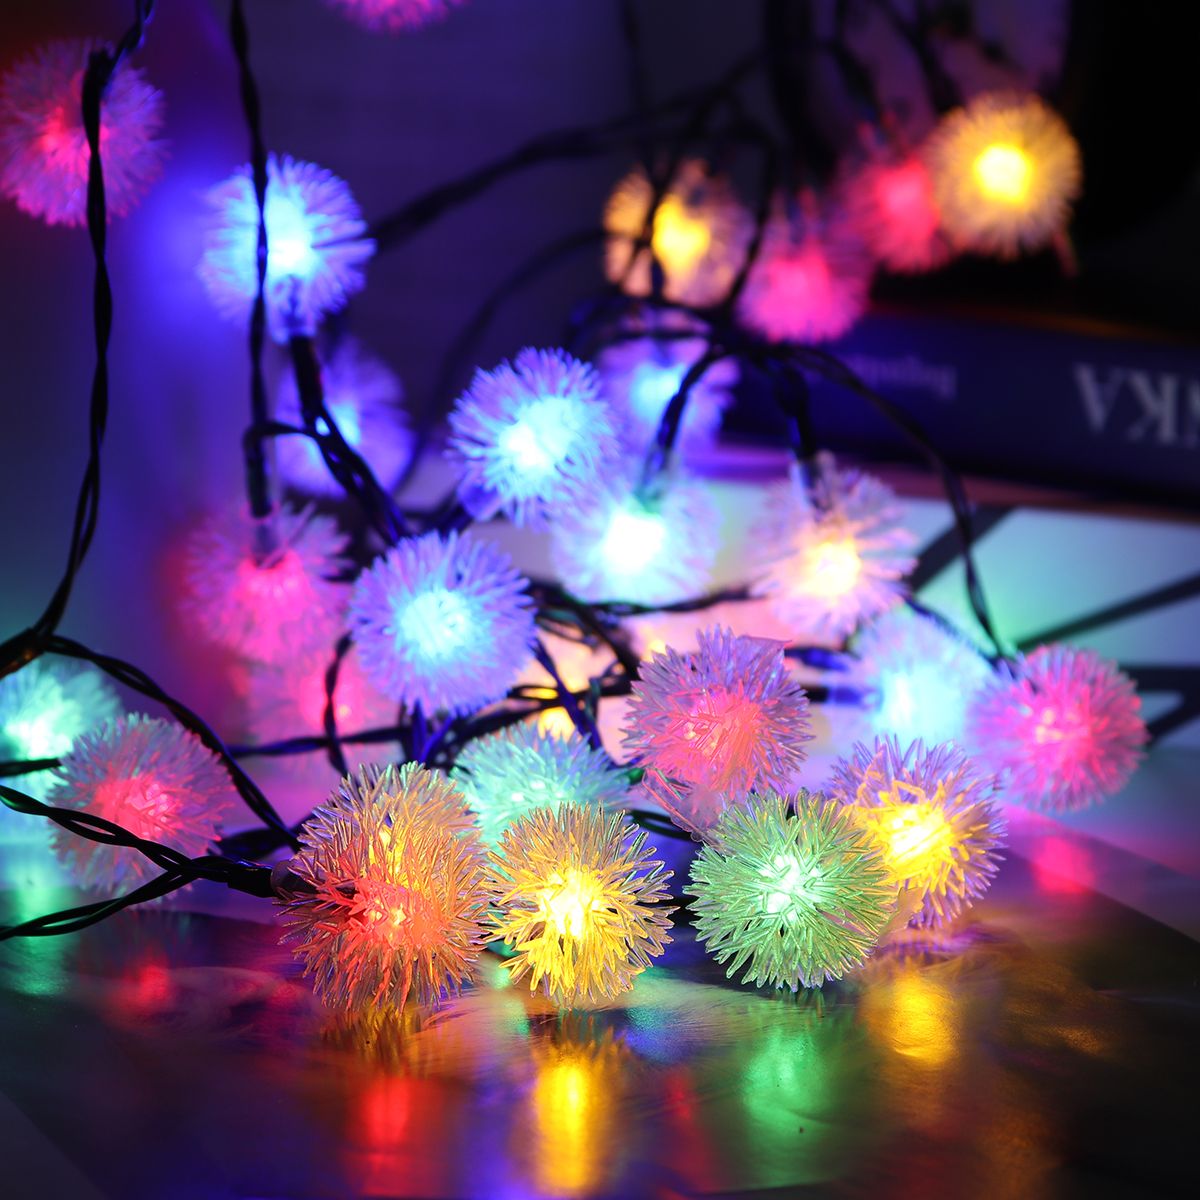 203050100LED-Solar-String-Light-Ball-Waterproof-Fairy-Lamp-Garden-Outdoor-Party-Christmas-Decoration-1730355